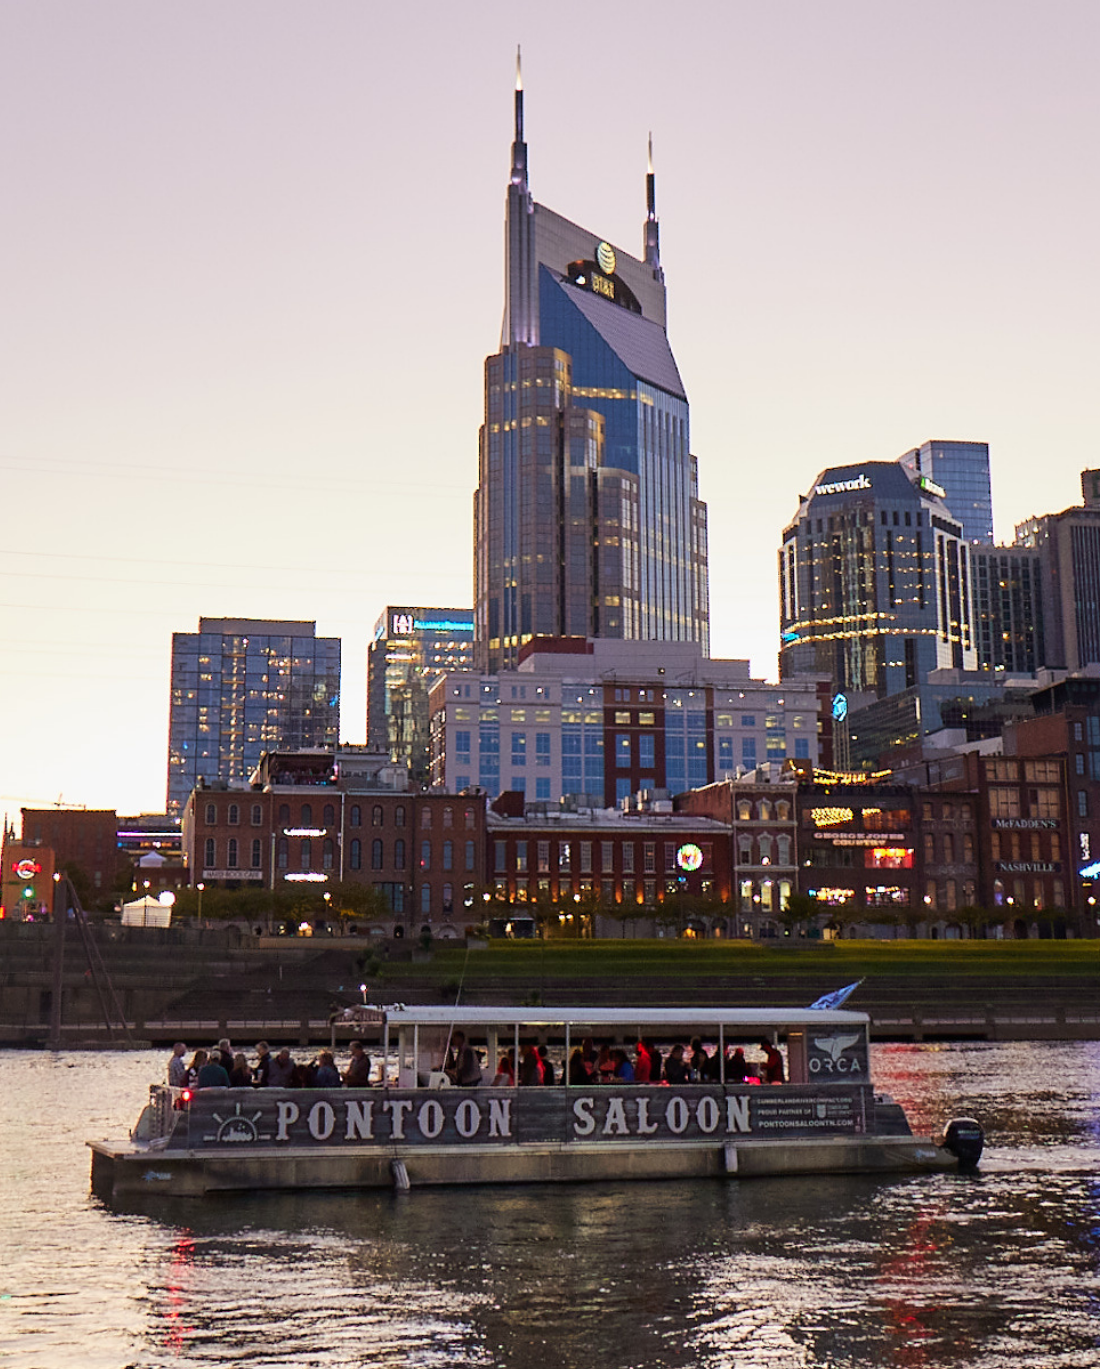 the pontoon saloon in front of the nashville skyline at sunset